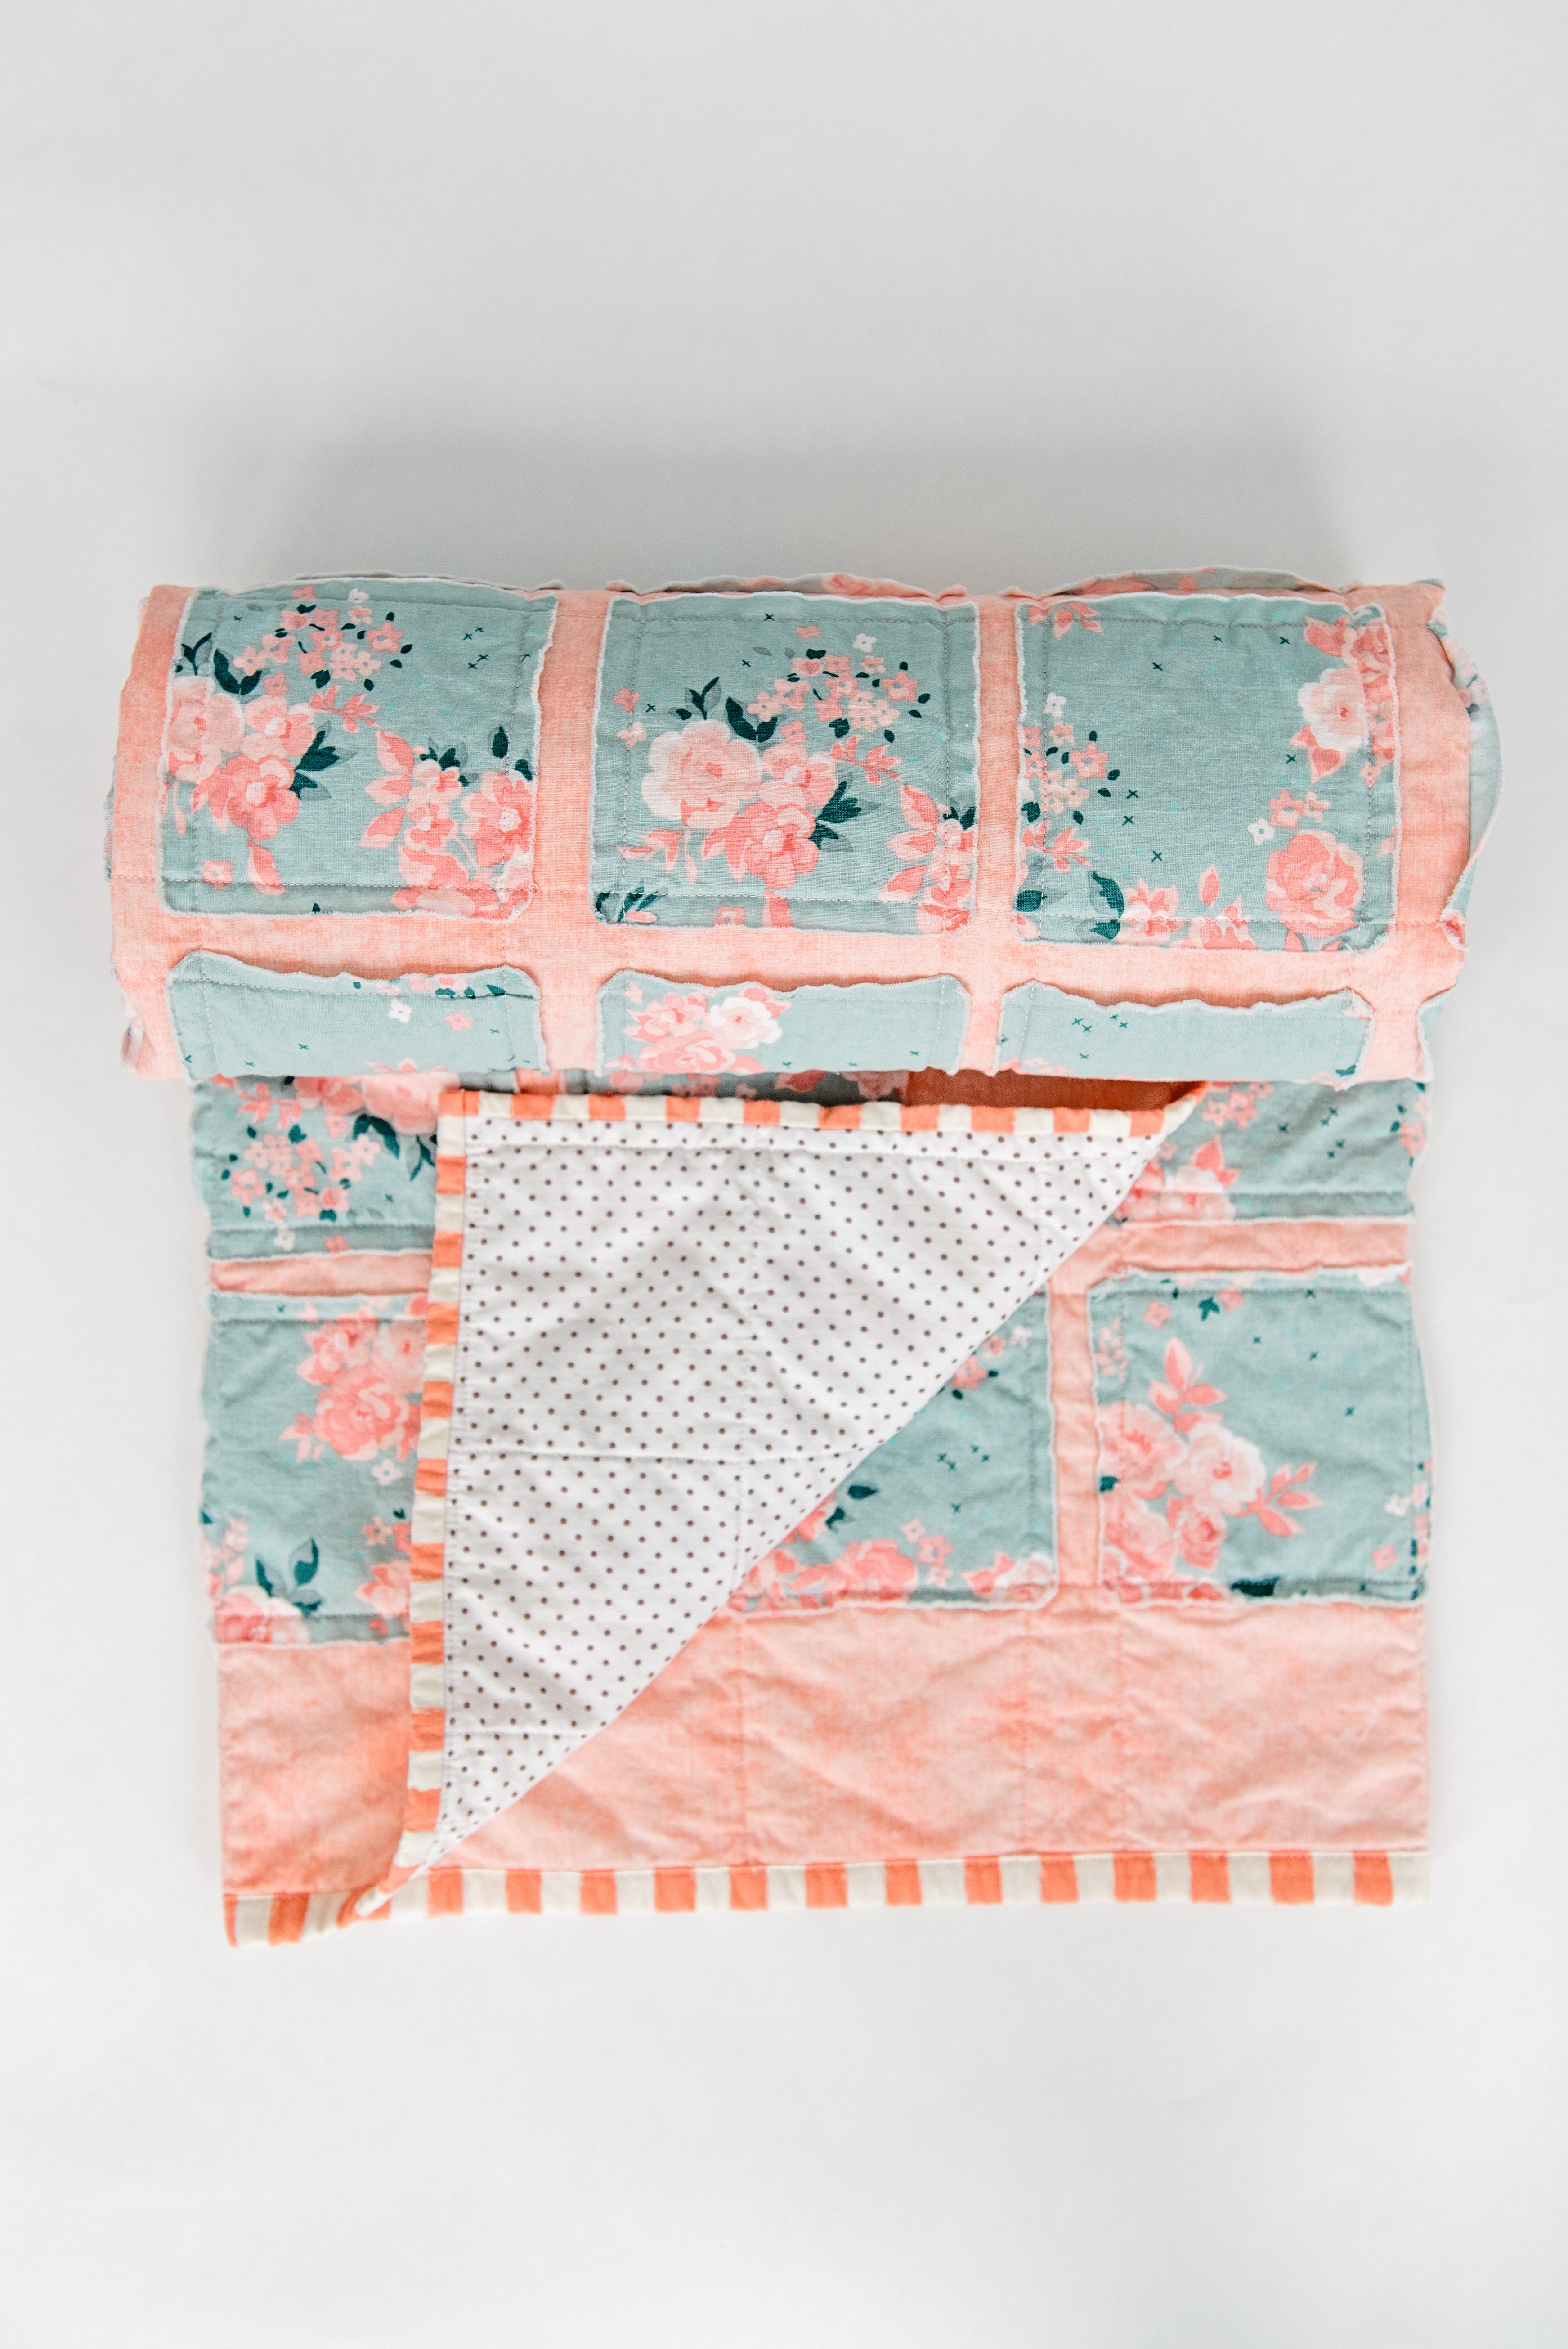 mint-apricot-beautiful-baby-quilt-newborn-baby-gift-top-gifts-for-babies